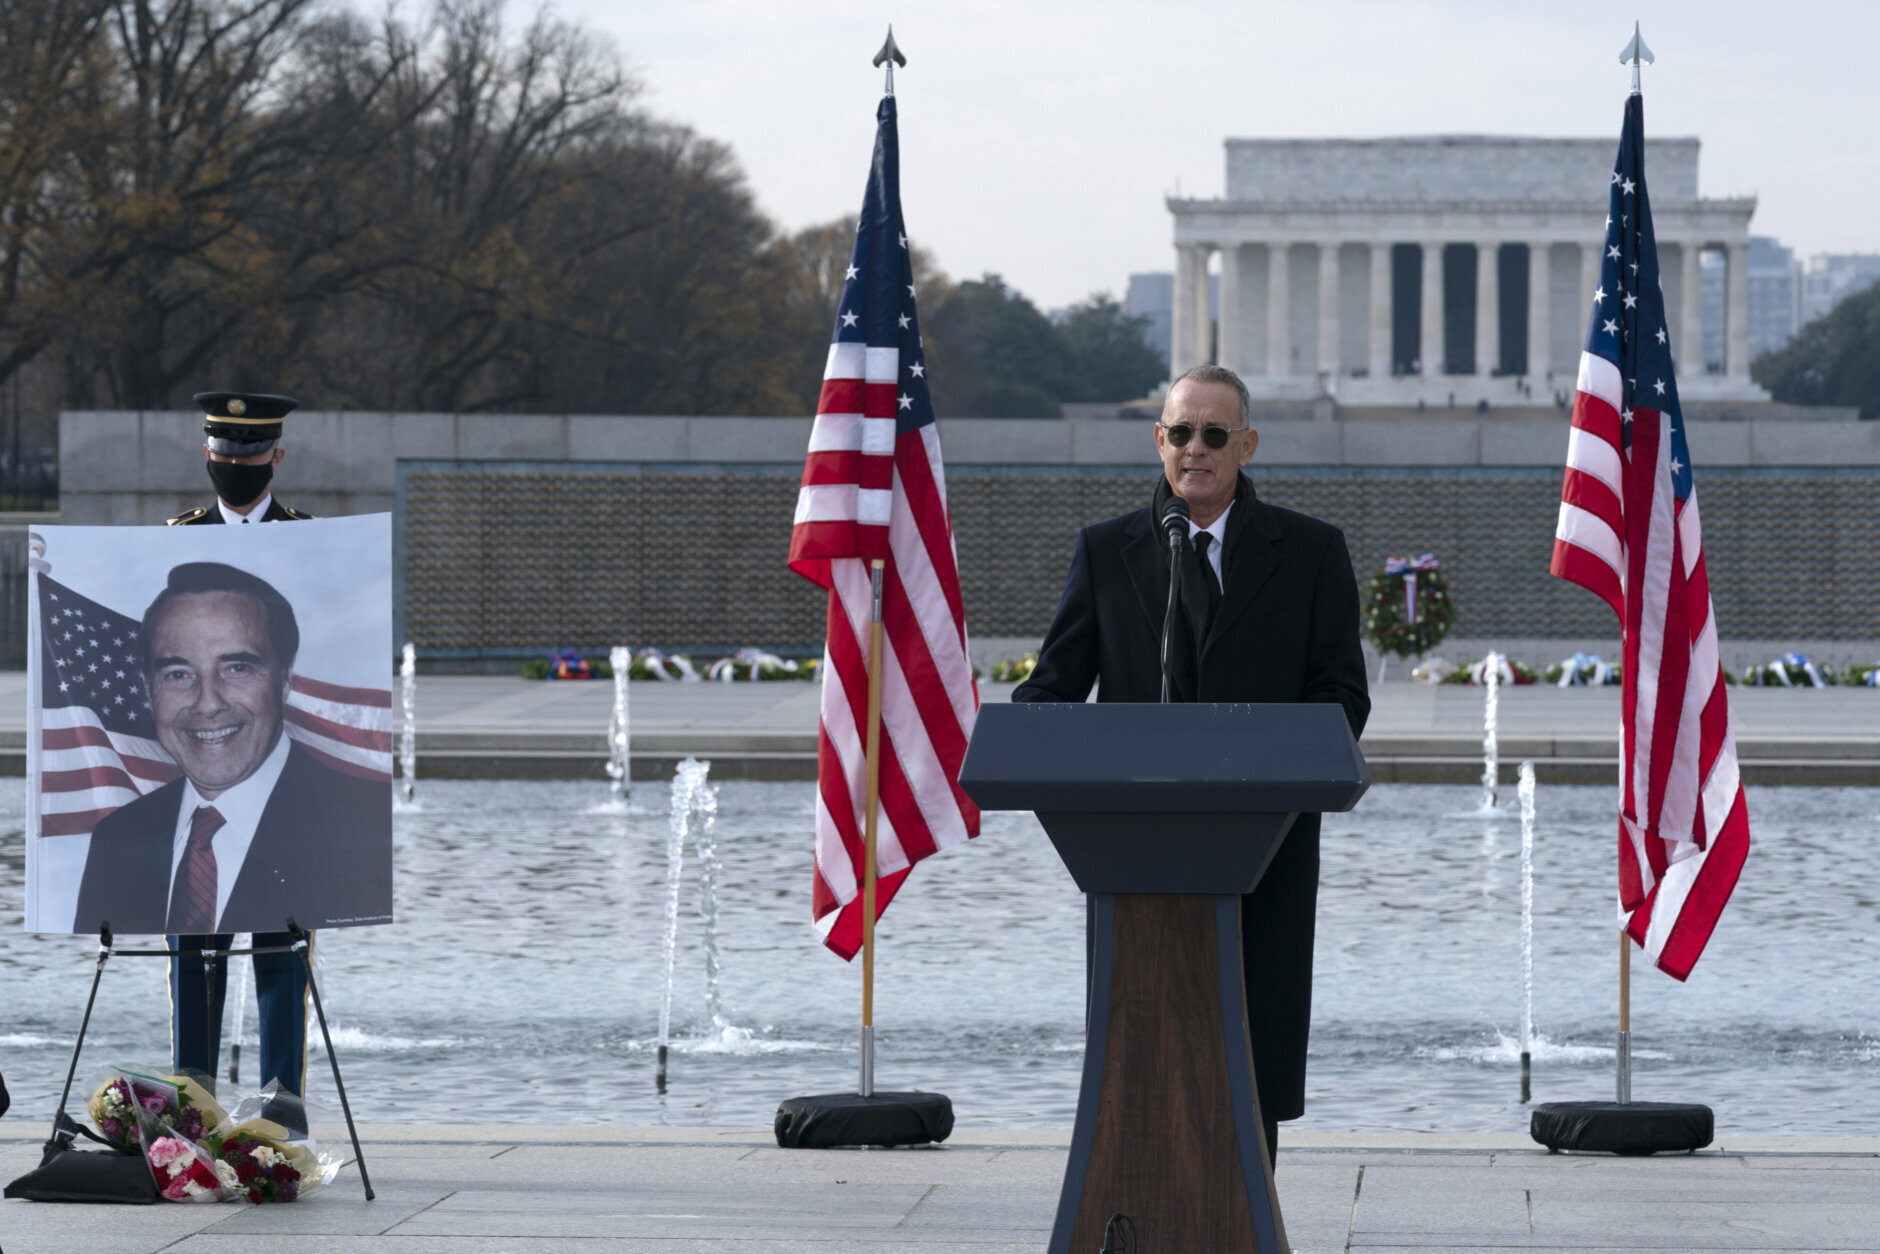 With the Lincoln Memorial in the background, actor and filmmaker Tom Hanks speaks during a ceremony to honor former Sen. Bob Dole, R-Kan., at the National World War II Memorial, on Friday, Dec. 10, 2021, in Washington. (AP Photo/Jose Luis Magana)